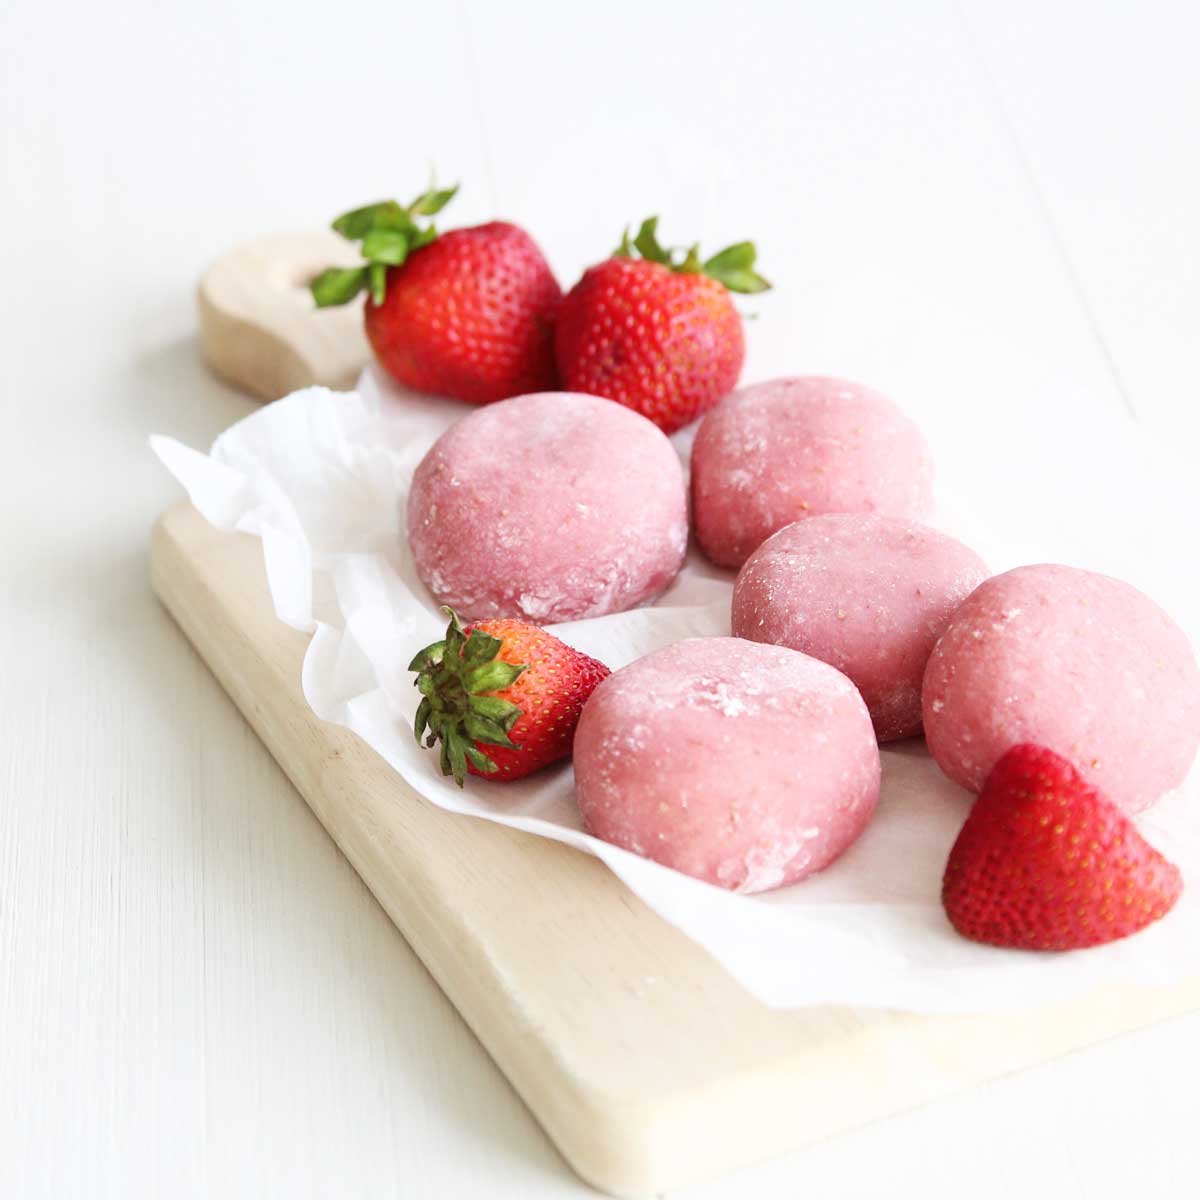 How to Make Healthy Strawberry Mochi (Made in the Microwave) - Banana Chocolate Mochi